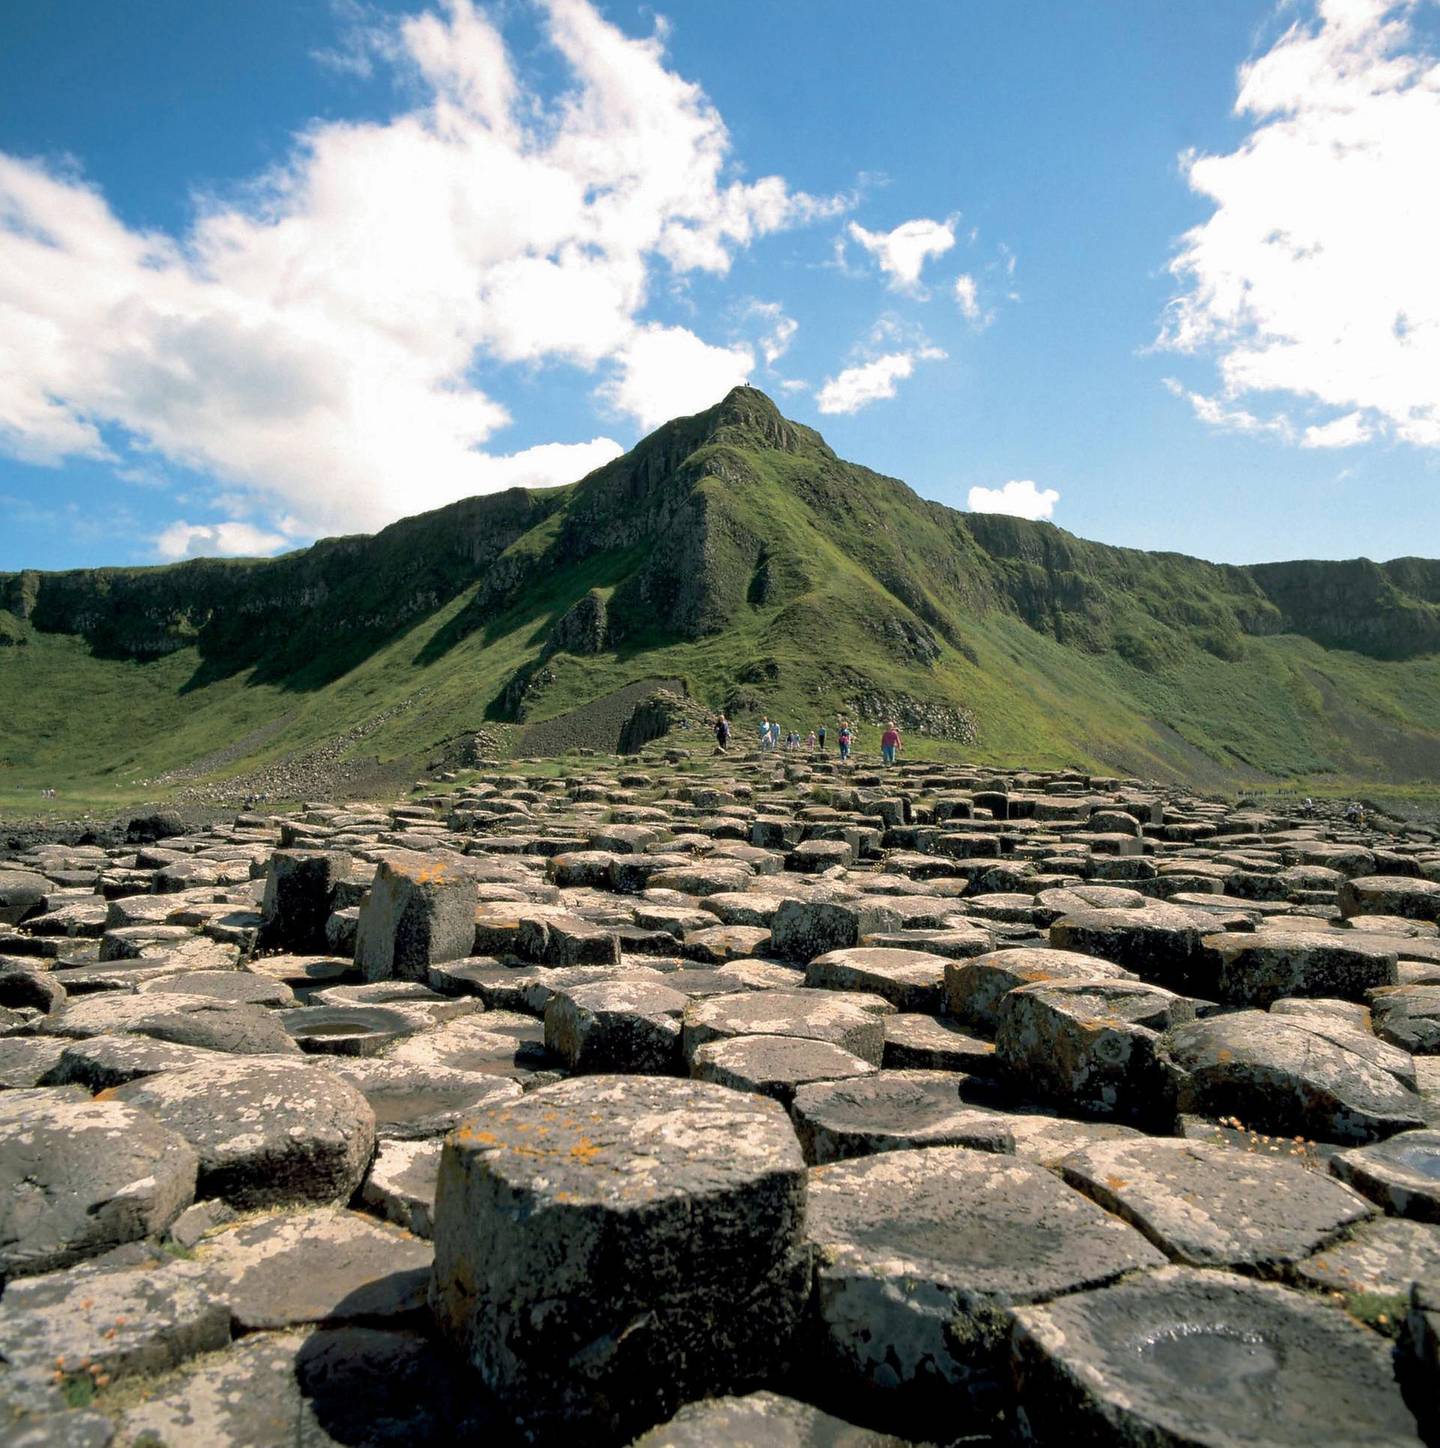 A handout photo of Giants Causeway in Ireland (Courtesy: Armagh City and District Council)